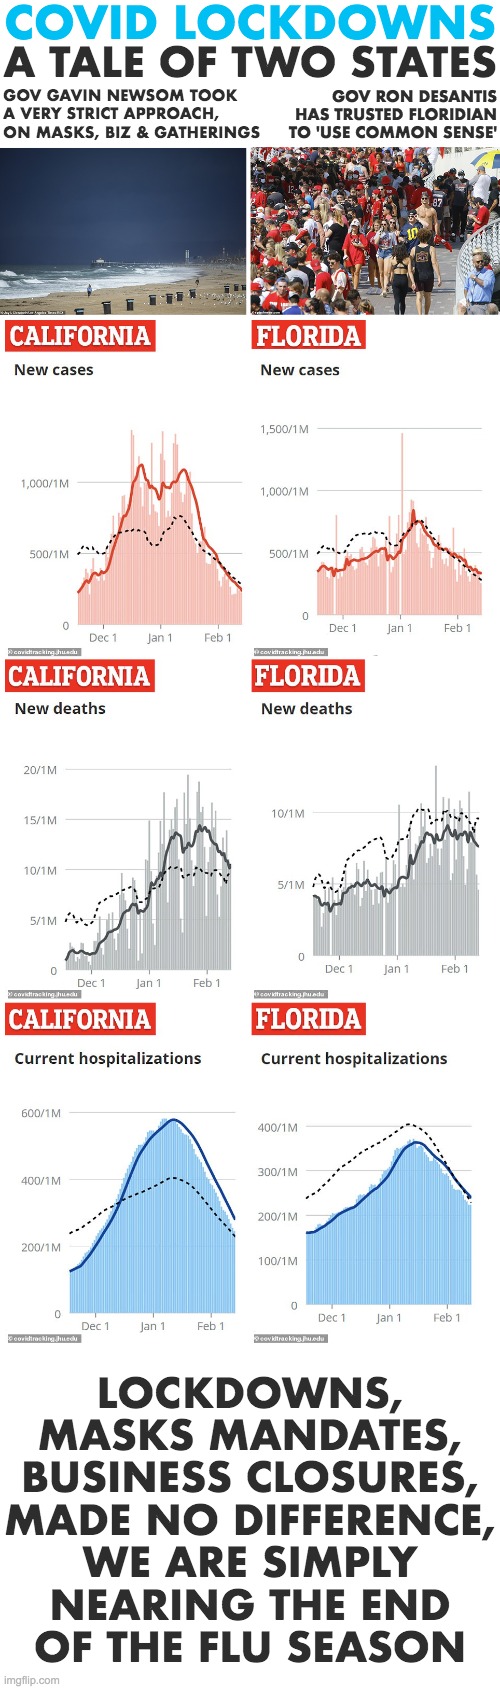 Covid Lockdowns made no difference | COVID LOCKDOWNS; A TALE OF TWO STATES; GOV GAVIN NEWSOM TOOK A VERY STRICT APPROACH, ON MASKS, BIZ & GATHERINGS; GOV RON DESANTIS HAS TRUSTED FLORIDIAN TO 'USE COMMON SENSE'; LOCKDOWNS,
MASKS MANDATES,
BUSINESS CLOSURES,
MADE NO DIFFERENCE,
WE ARE SIMPLY
NEARING THE END
OF THE FLU SEASON | image tagged in covid-19,coronavirus,lockdown,mask,social distancing,flu season is over | made w/ Imgflip meme maker